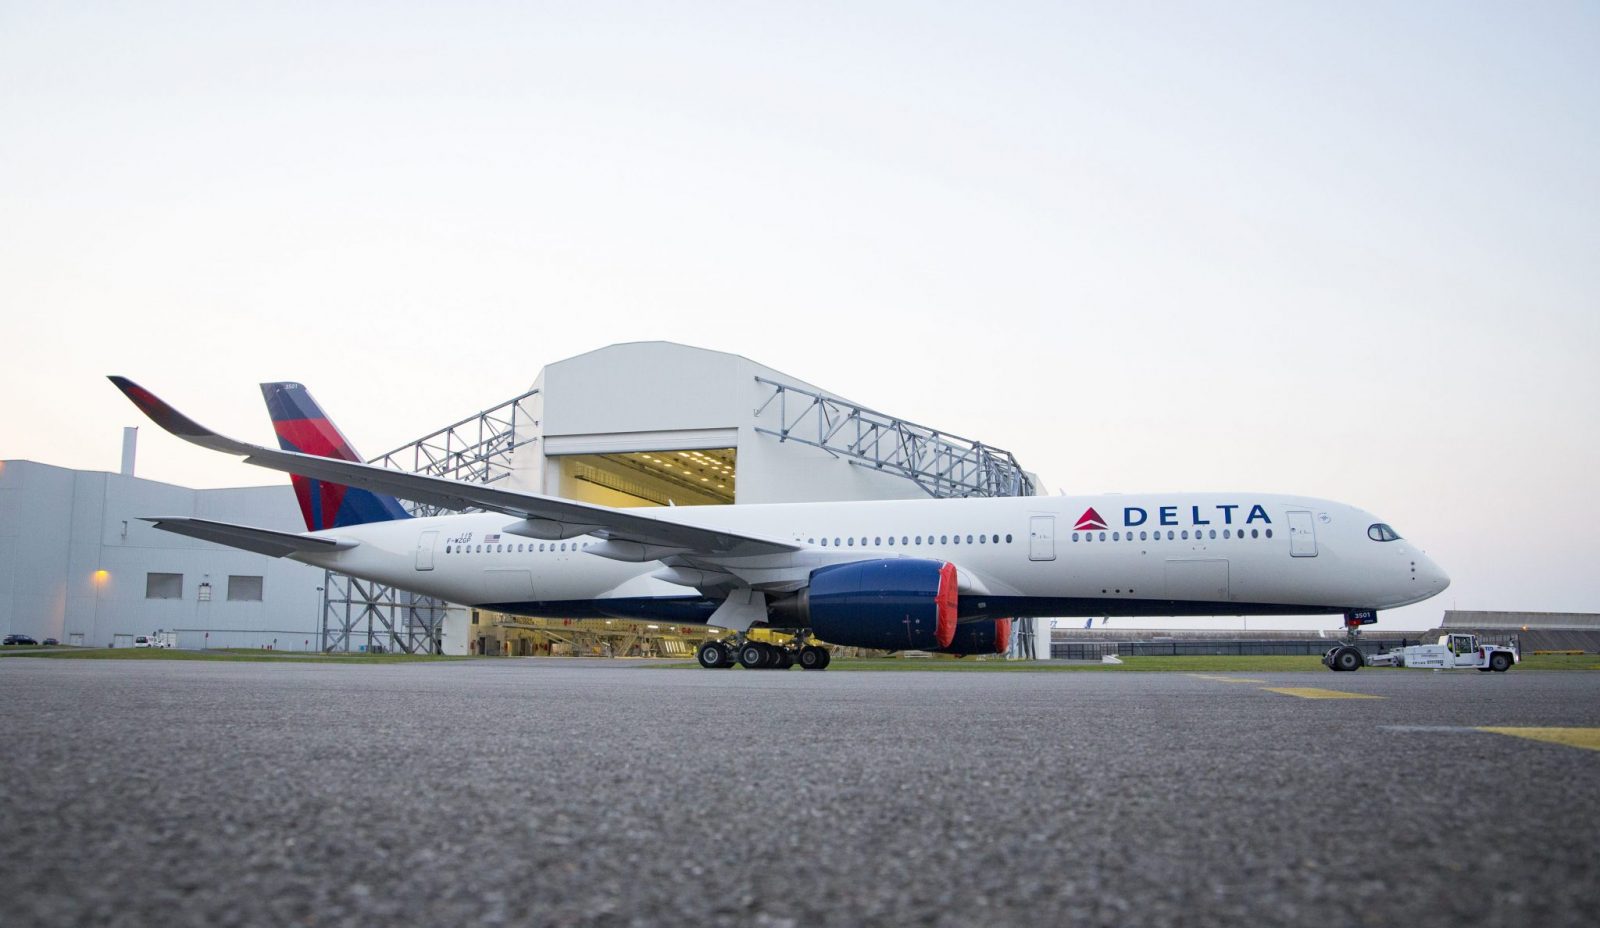 Delta Air Lines Gears Up for Delivery of its New A350 - Shows Off New Paint Job